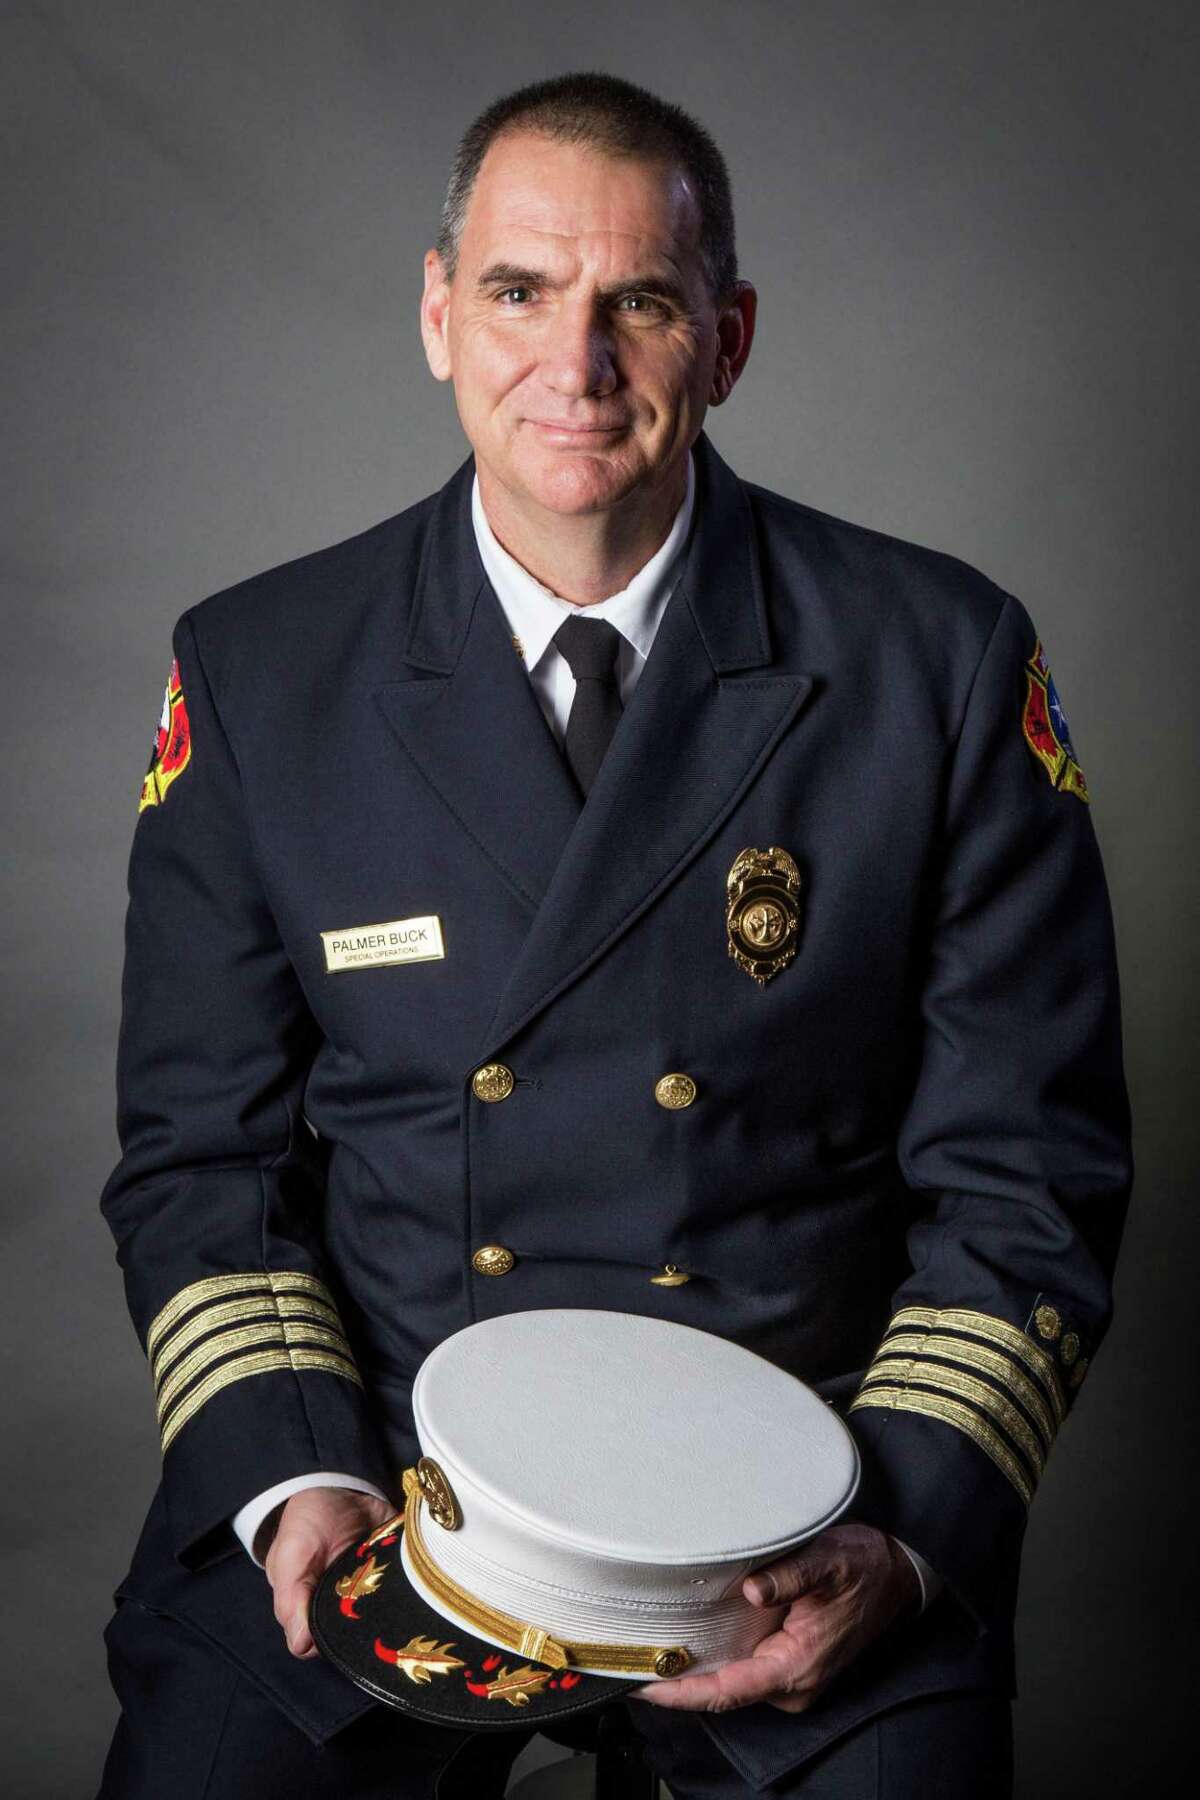 The Woodlands Township announced the hiring of a new fire chief for The Woodlands Fire Department. Palmer Buck, currently a division chief in operations for the Austin (Texas) Fire Department, will replace Alan Benson, who suddenly retired in May with one week's notice. Buck began work on Dec. 2, 2019.